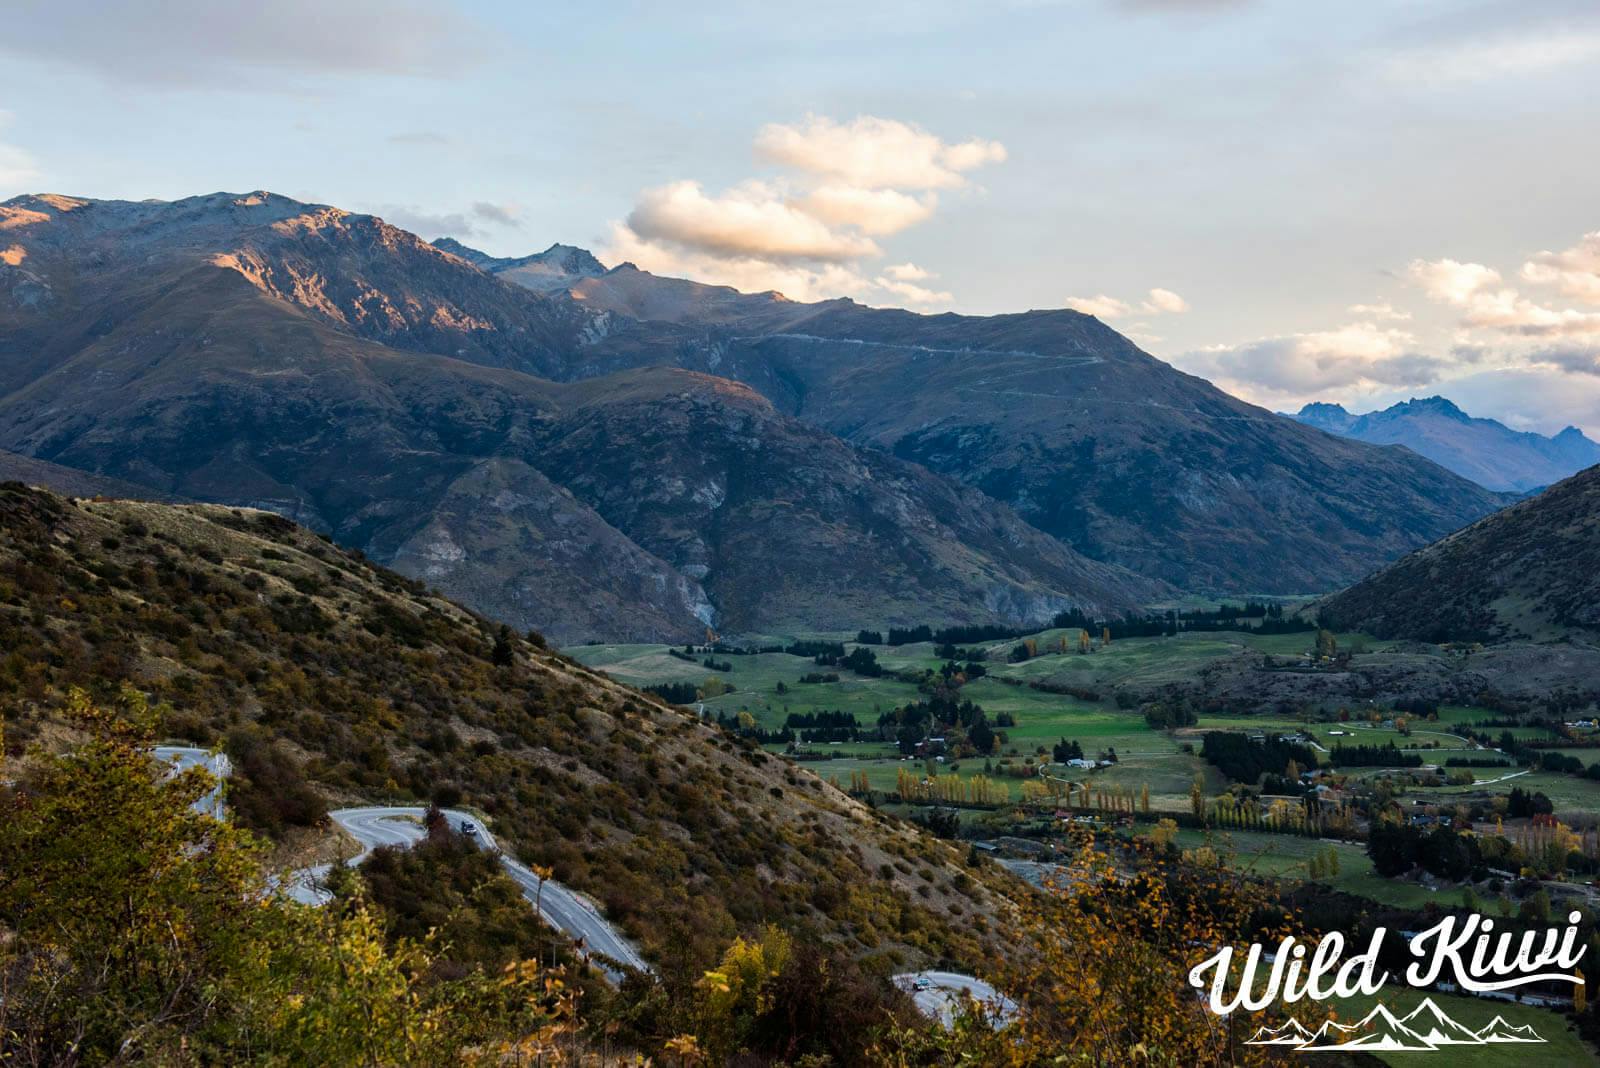 Make the most of your New Zealand trip - See all that the South Island has to offer